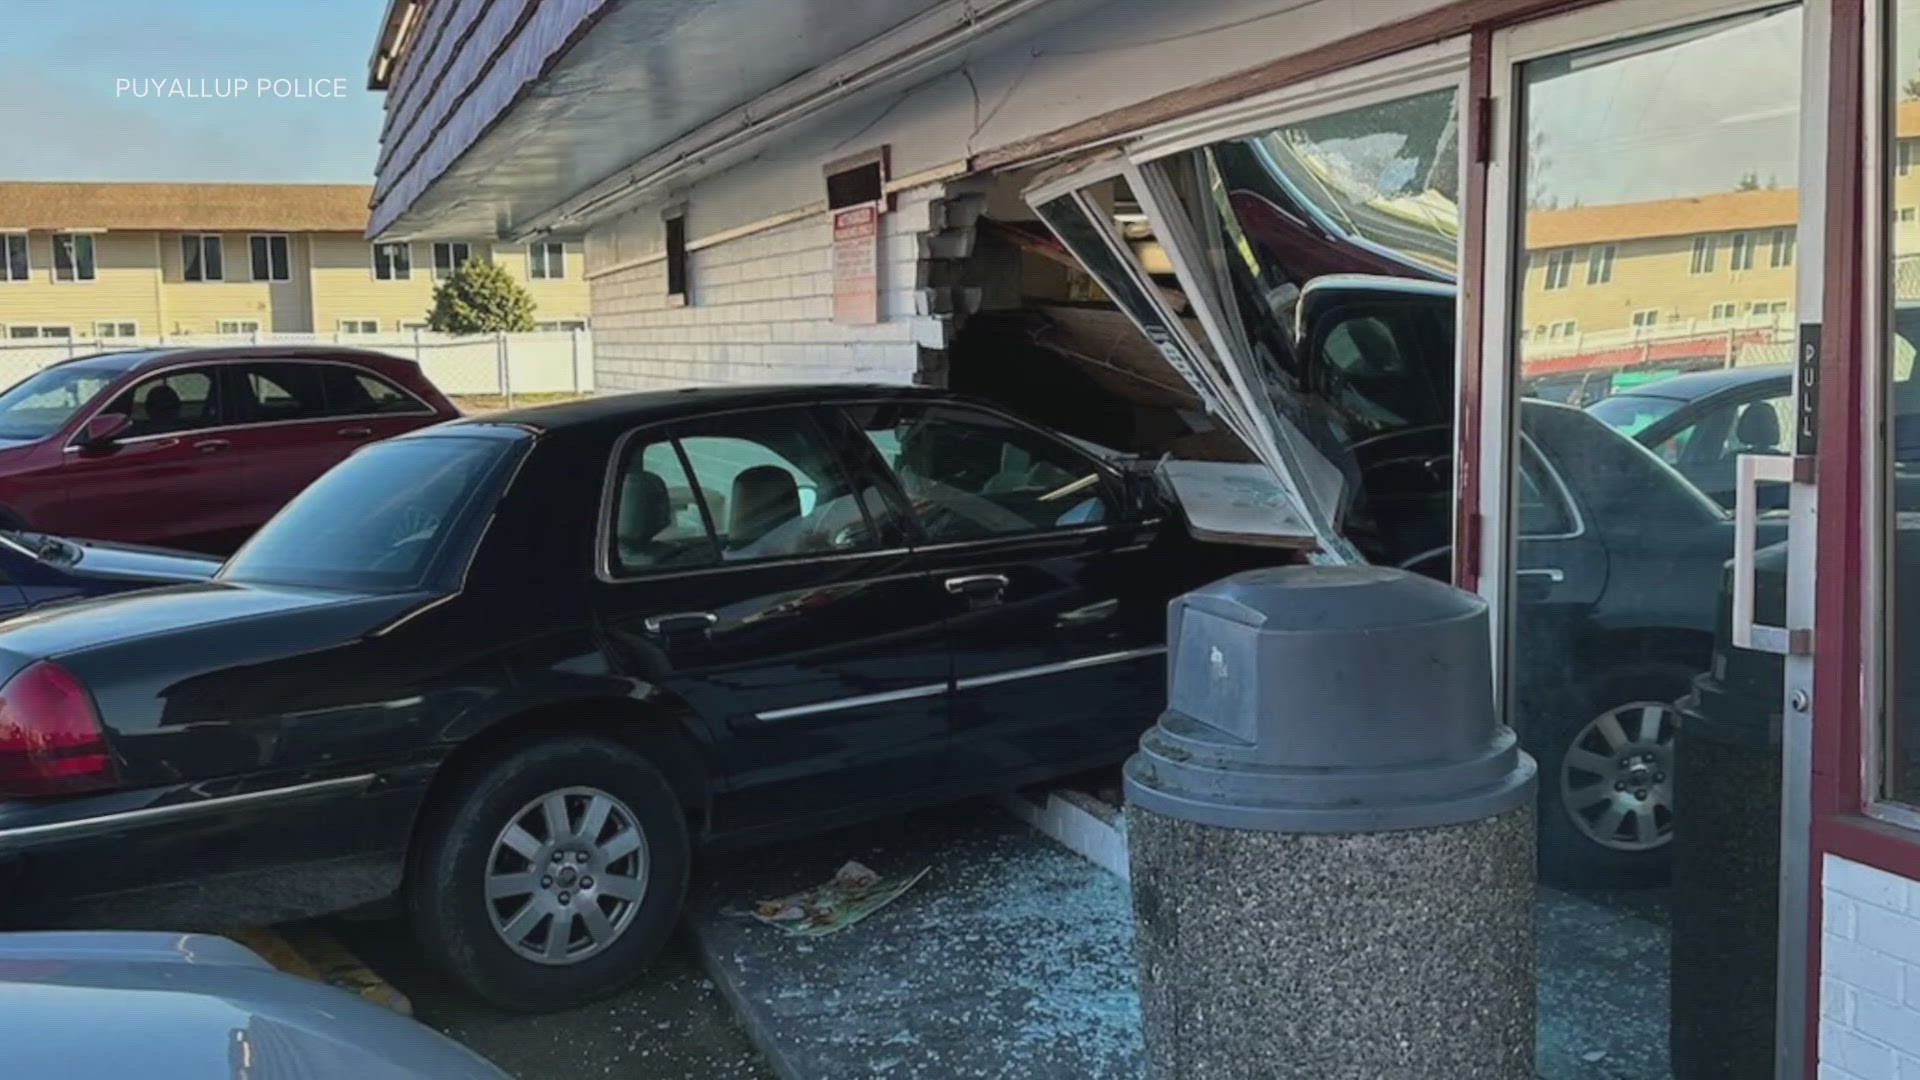 According to the Puyallup Police Department, the crash caused a fryer to fall and splash hot grease onto the employee. Two other employees suffered minor injuries.